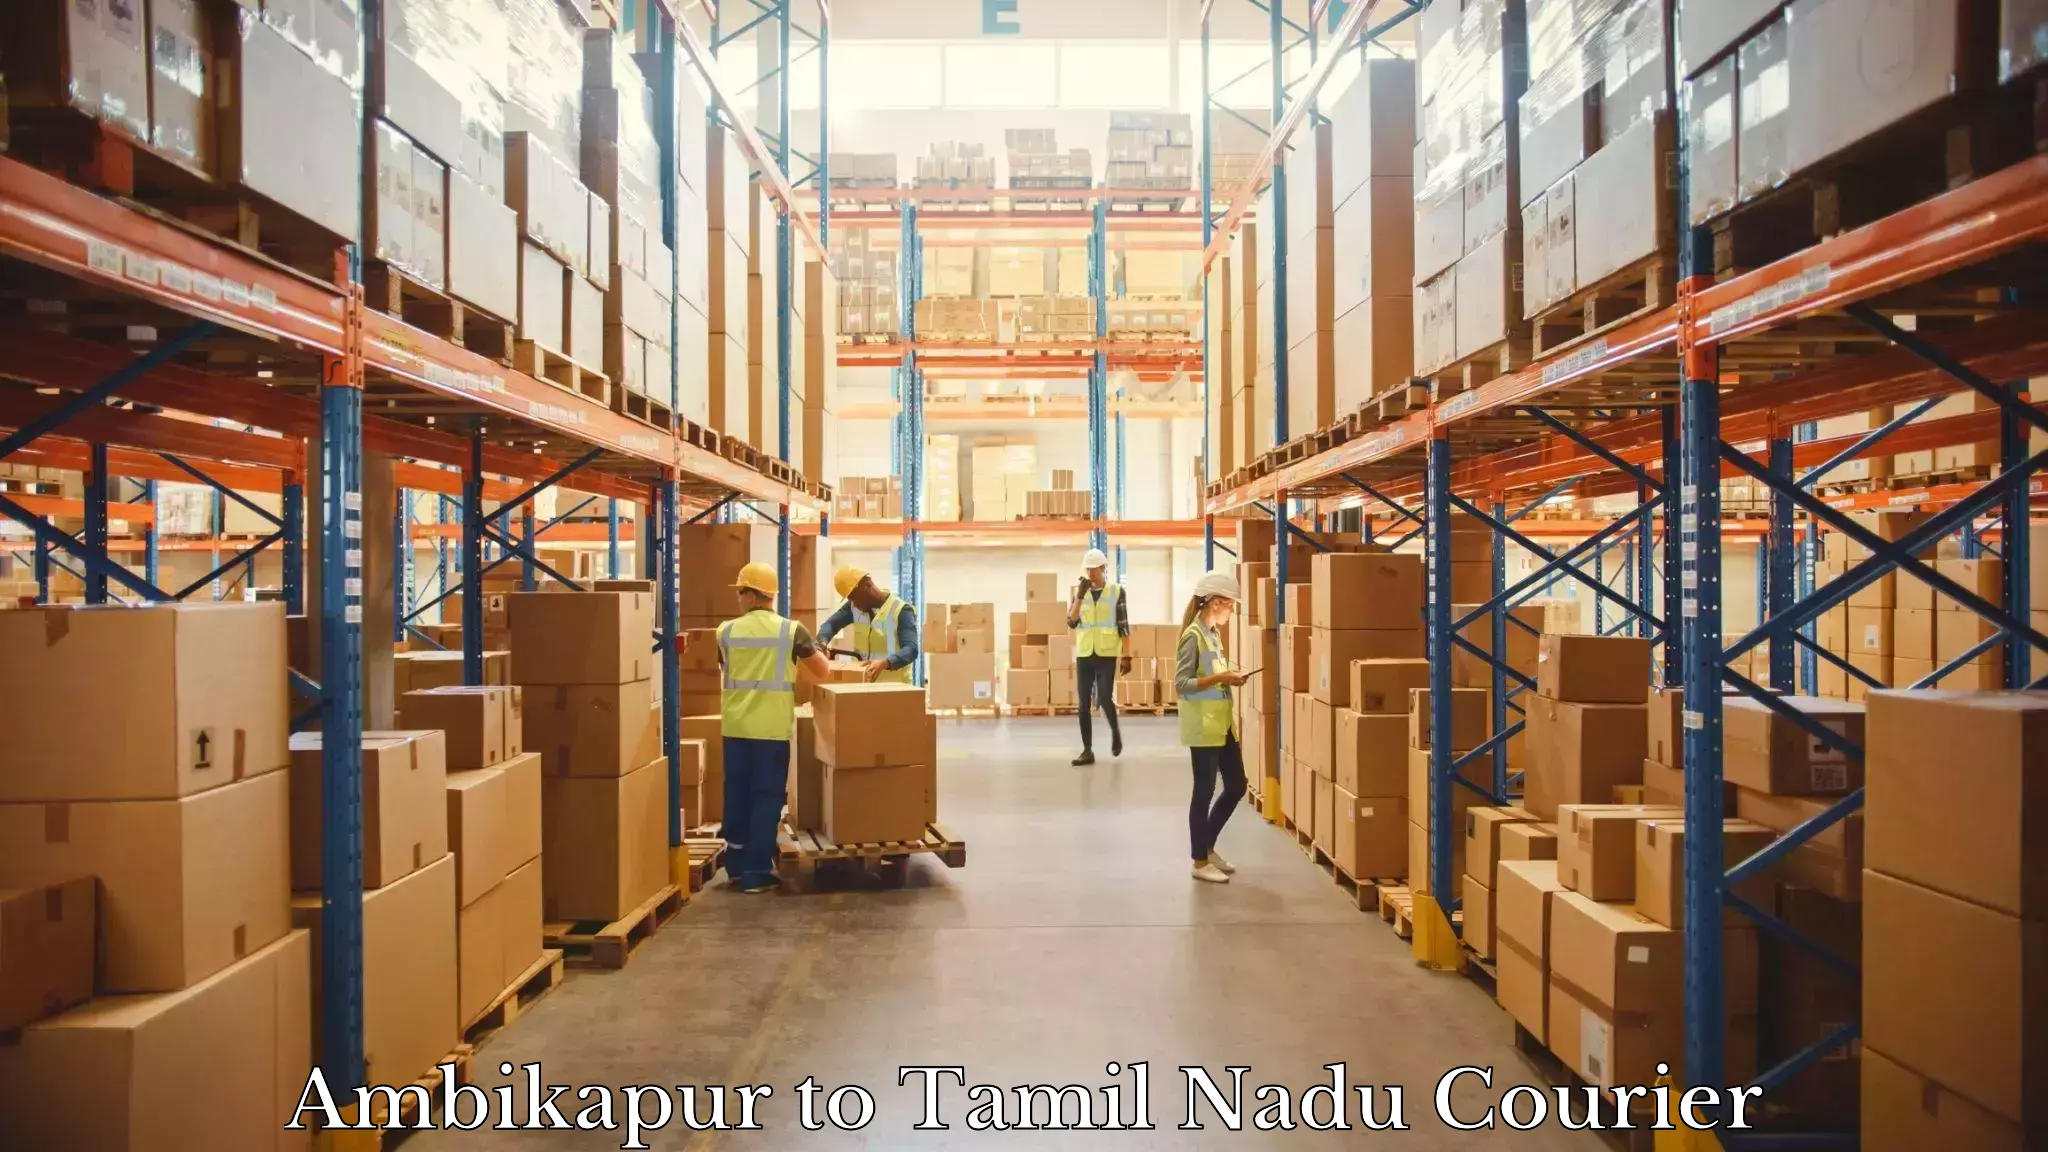 Courier service booking Ambikapur to Coimbatore